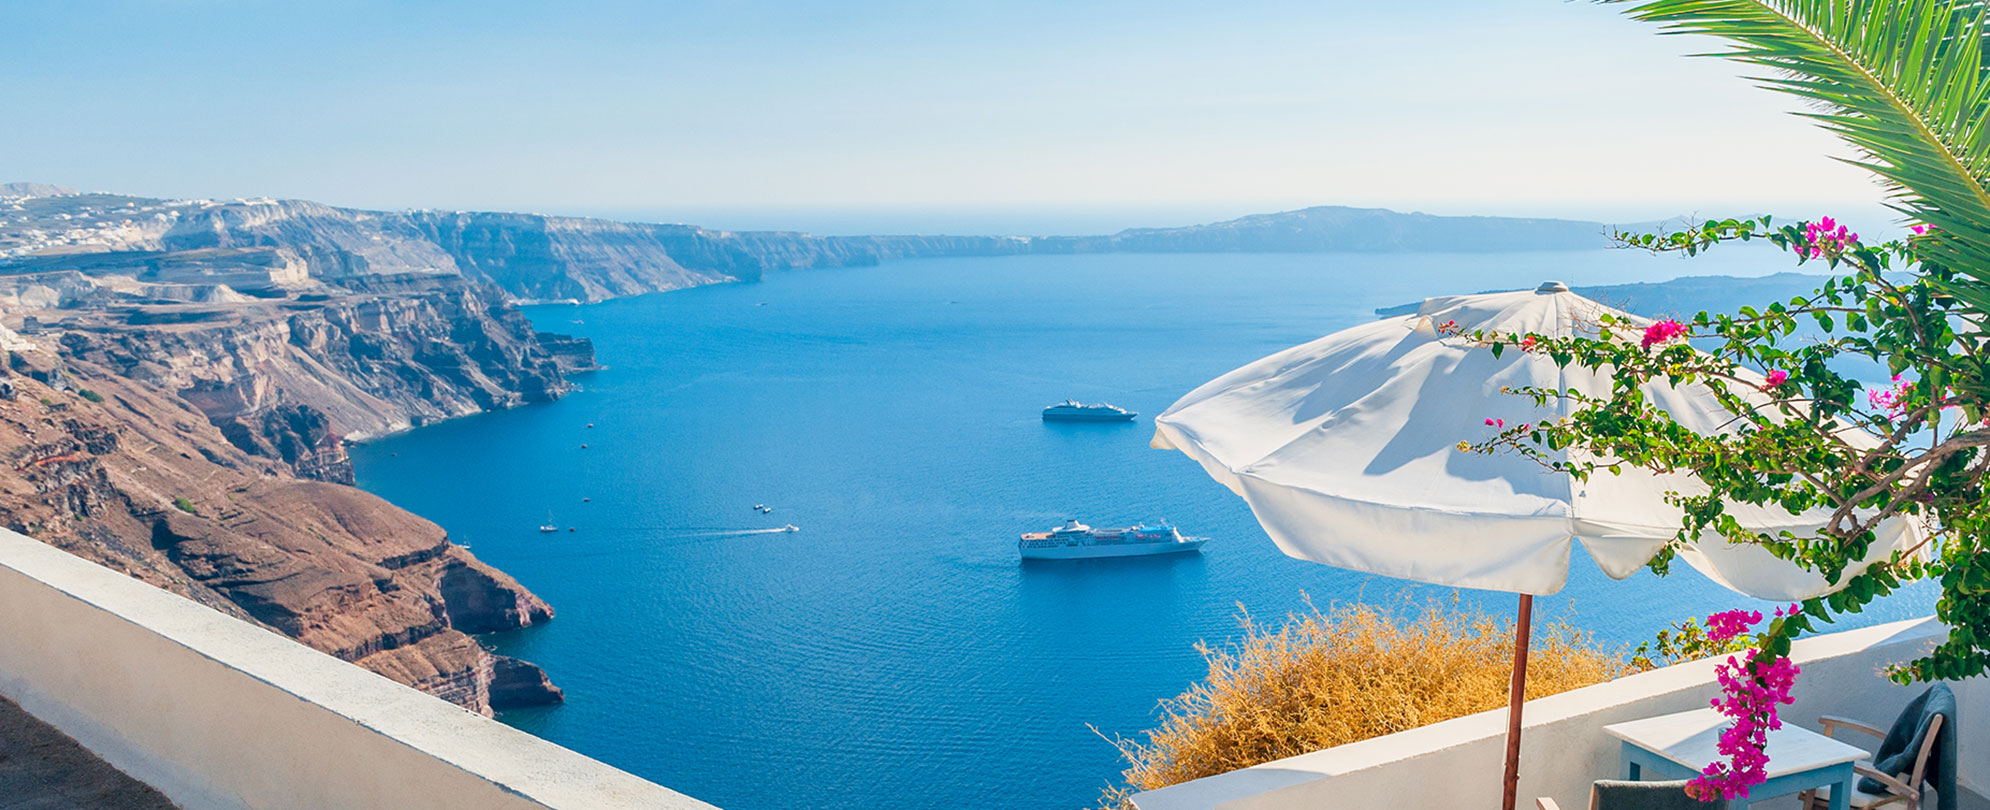 Panoramic view of the ocean and mountains in Santorini Island, Greece.